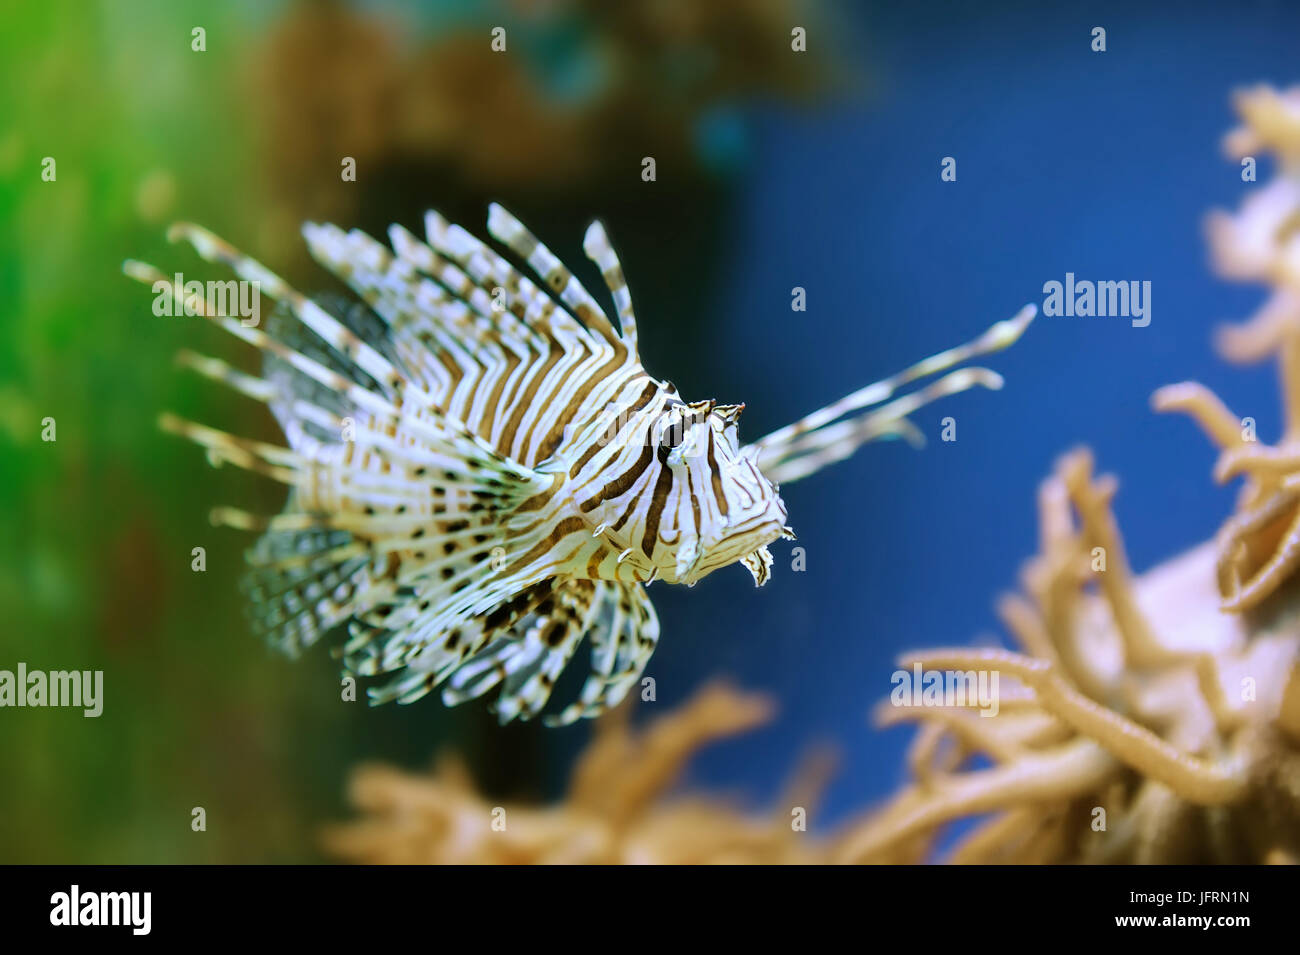 A lionfish swiming over seagrass Stock Photo